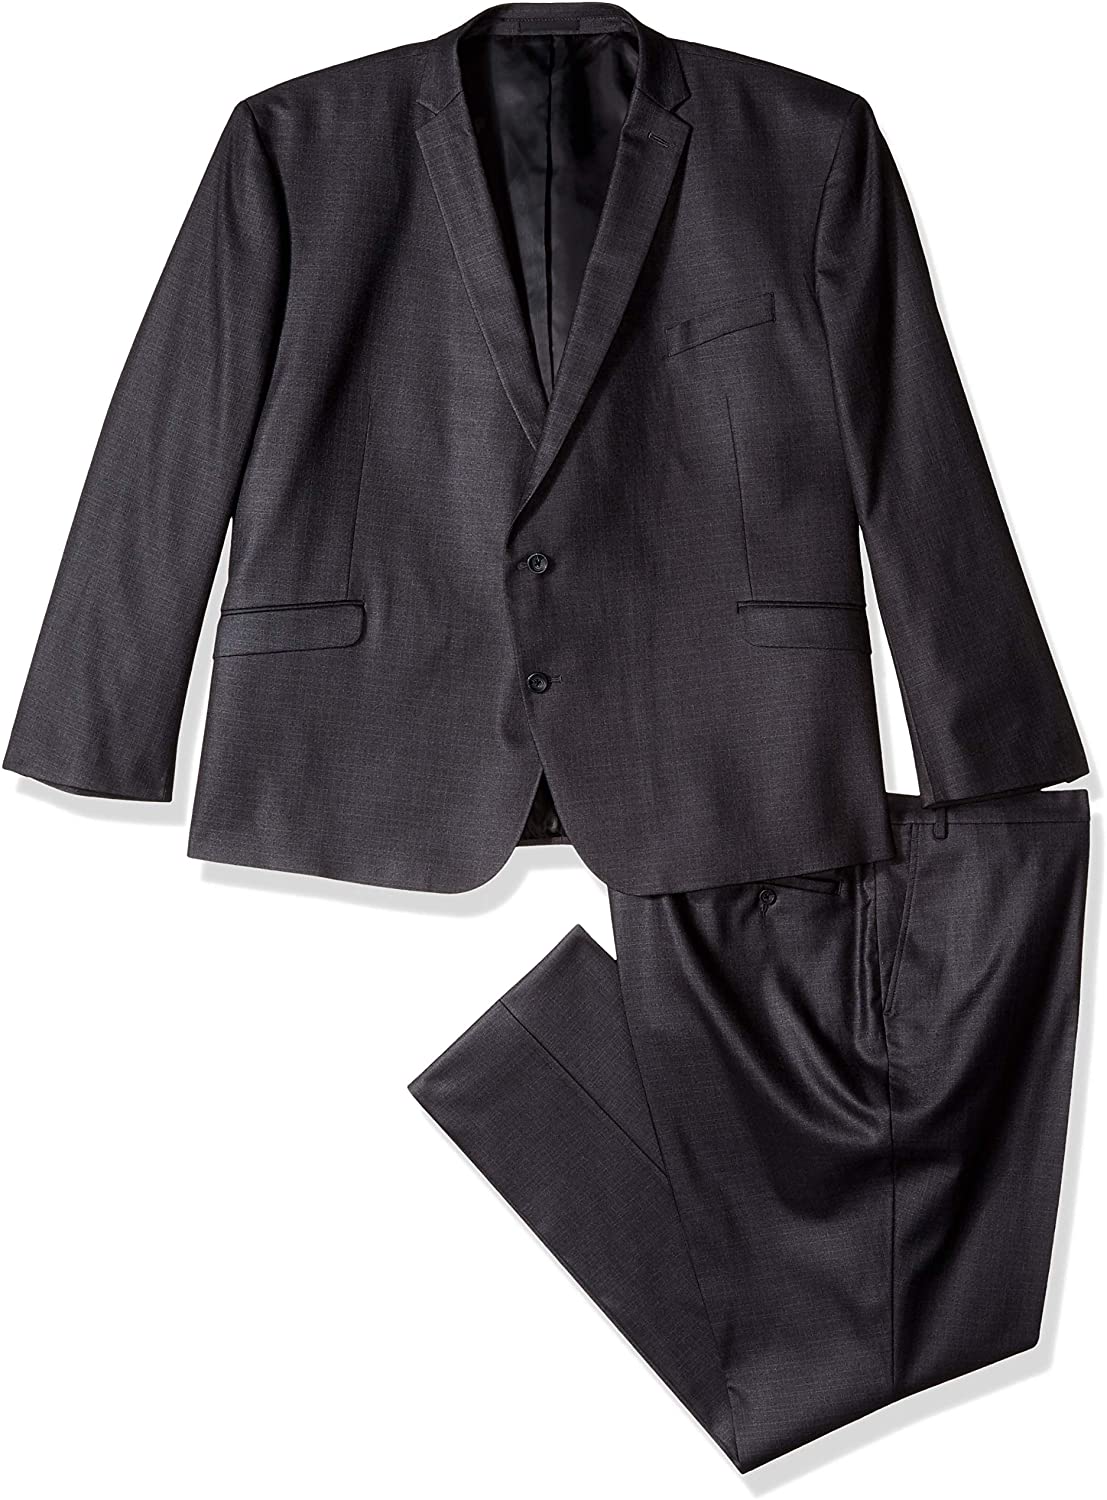 Kenneth Cole REACTION Mens Slim Fit Performance Suit with Stretch